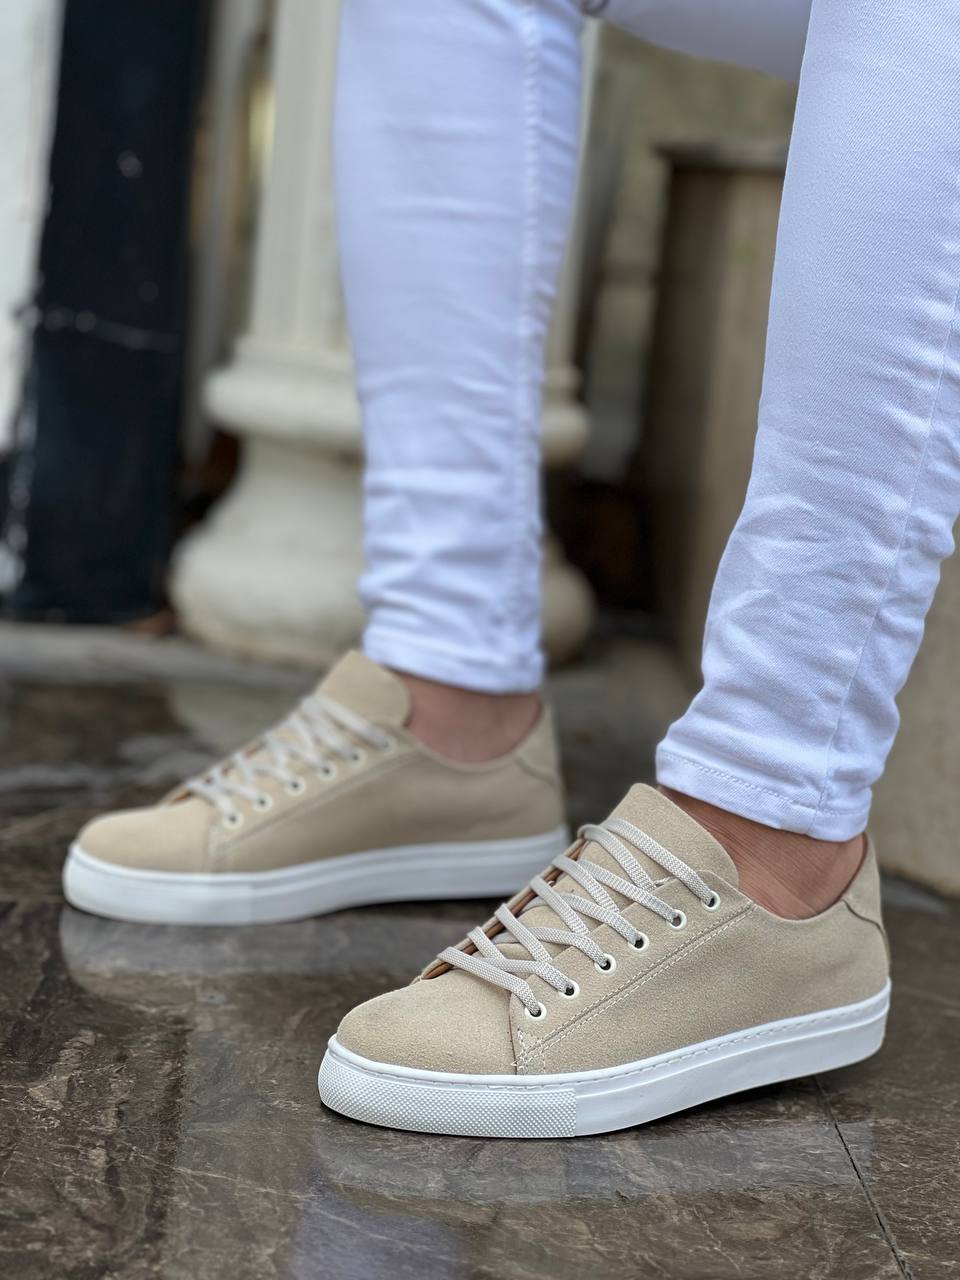 KB-122 Beige Suede High Sole Laced Casual Men's Shoes - STREETMODE™